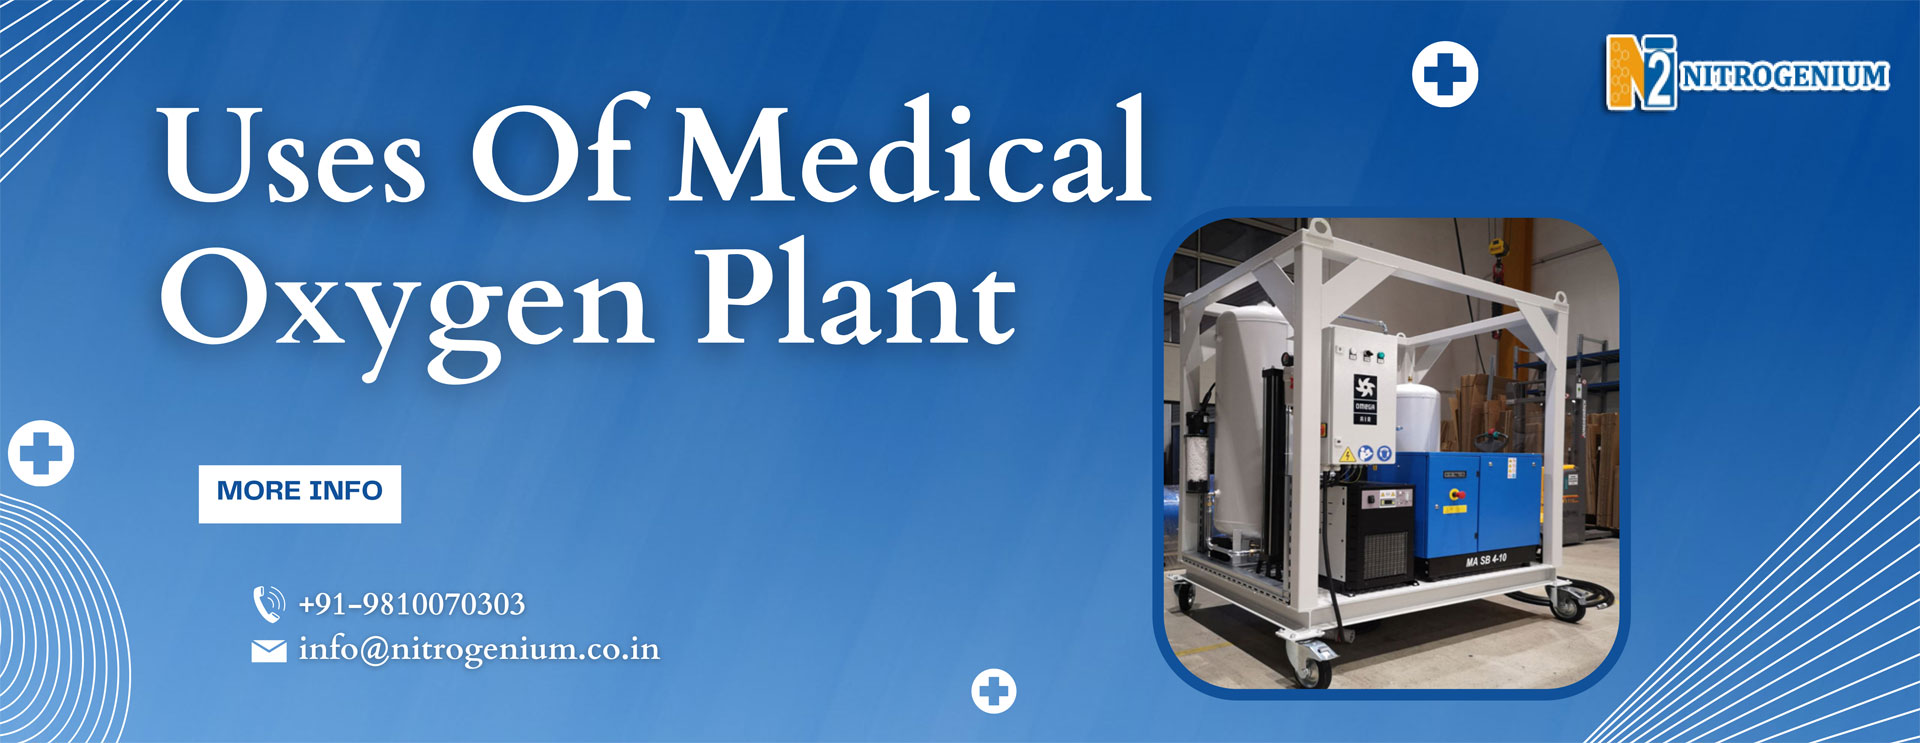 Uses Of Medical Oxygen Plant